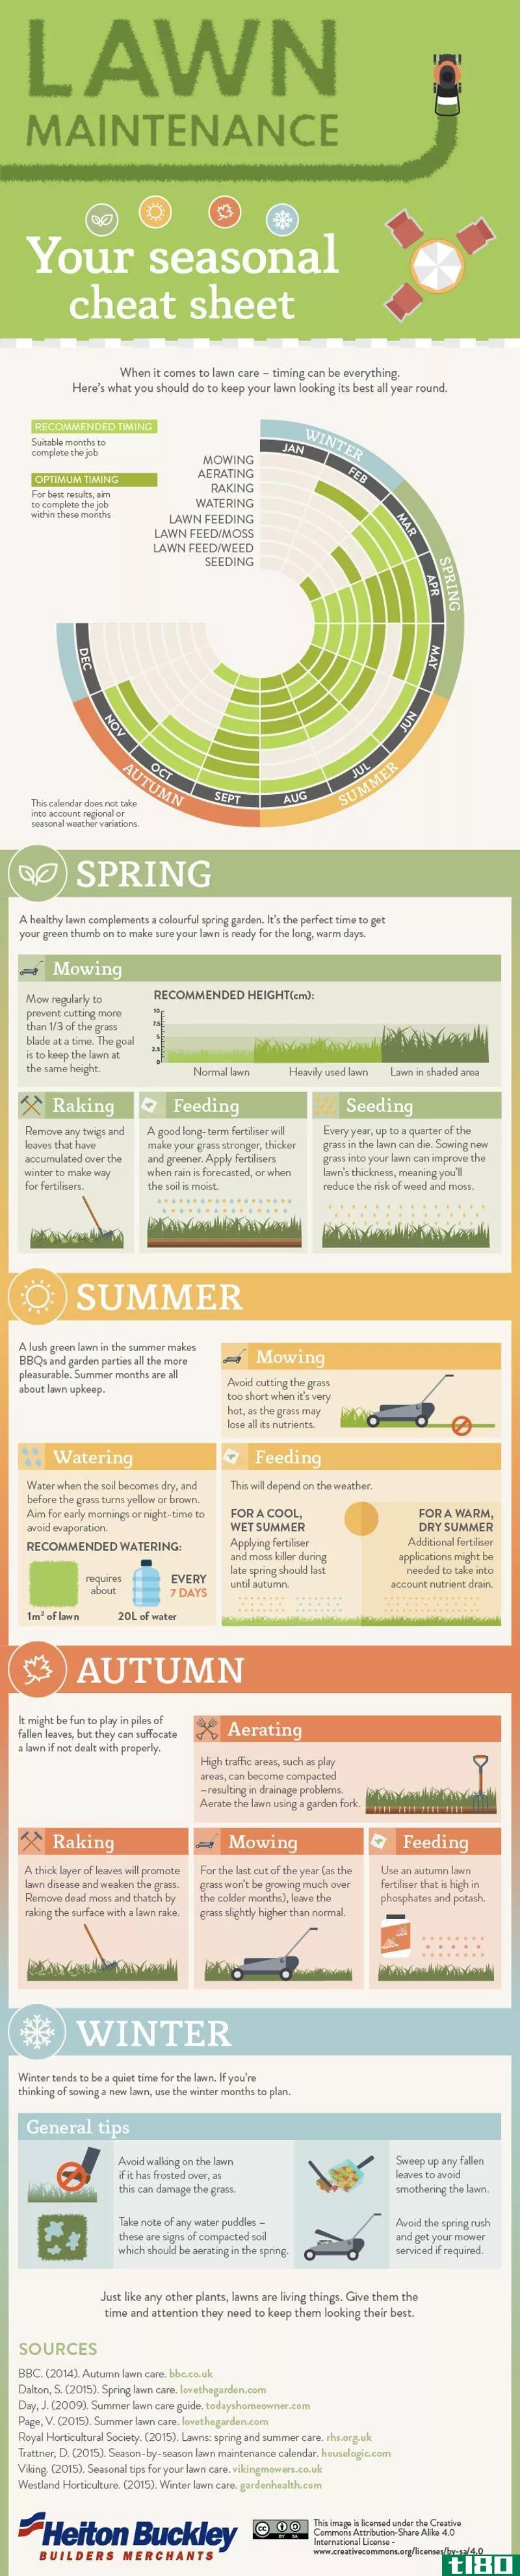 Illustration for article titled This Chart Shows the Lawn Maintenance You Need to Do Every Month of the Year